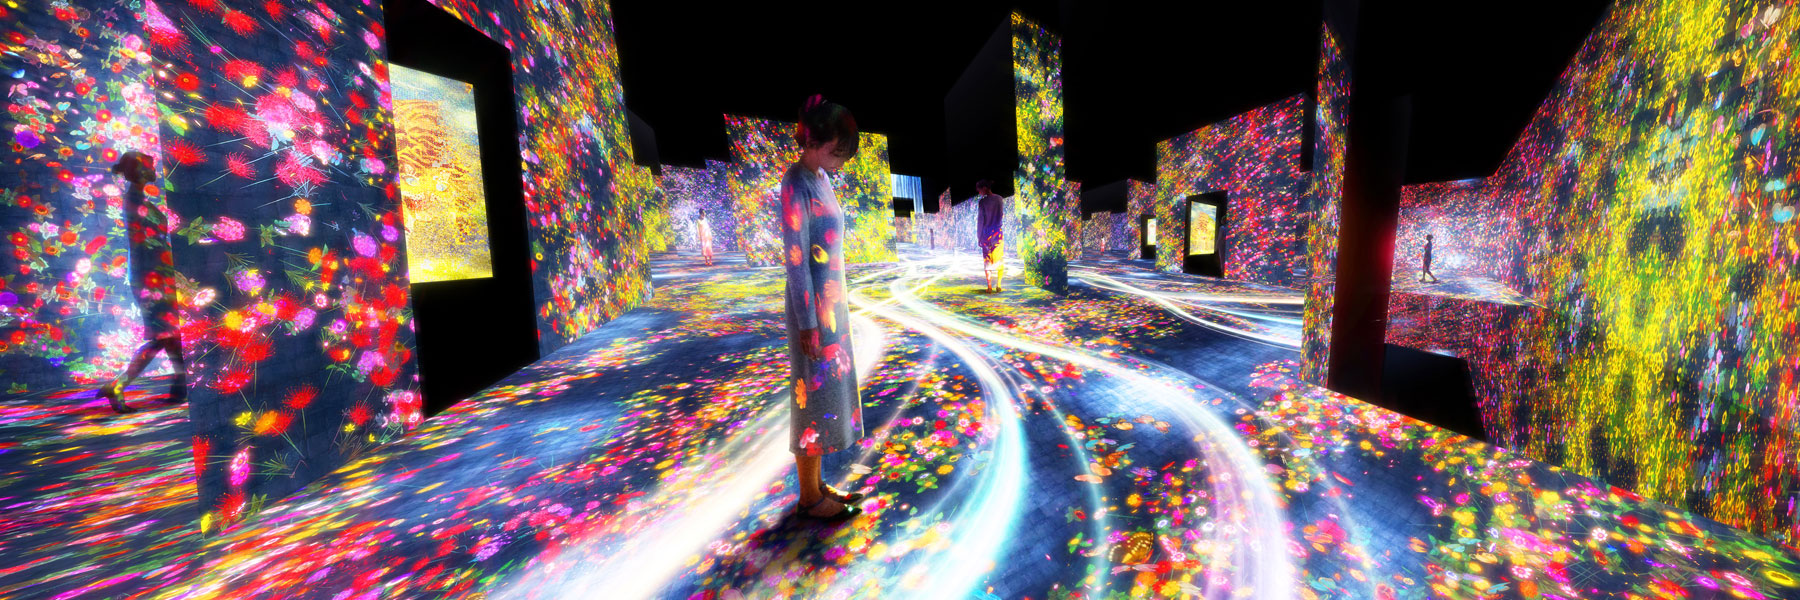 mori building and teamlab to launch mori building digital art museum in tokyo this summer